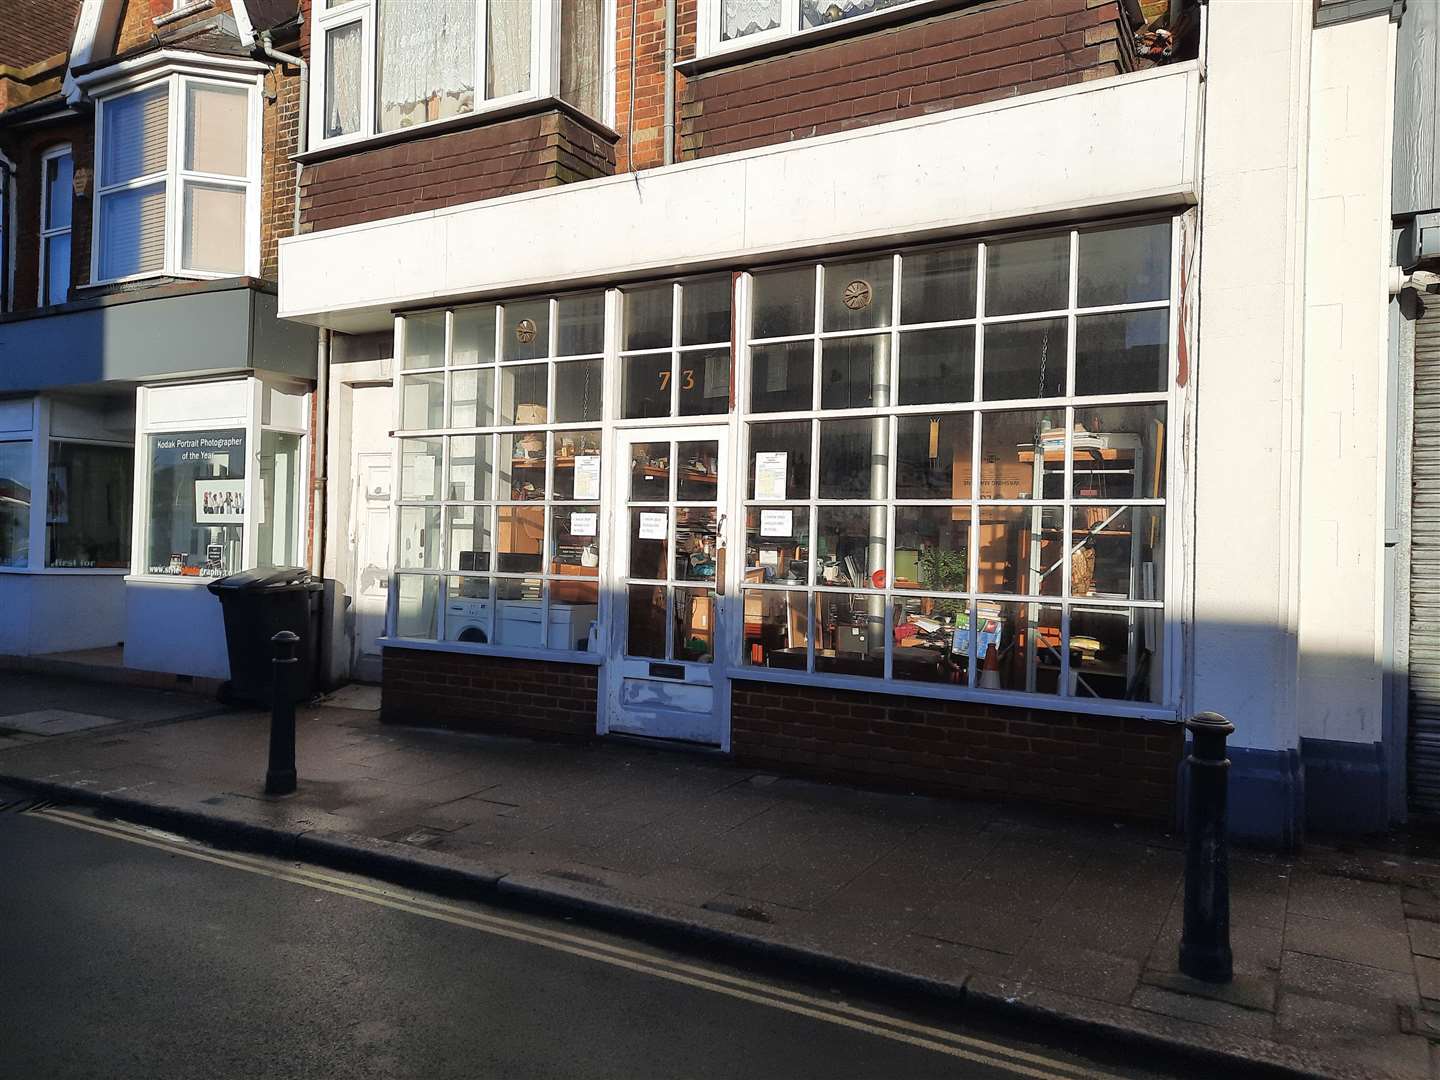 Household Goods Bought & Sold in High Street, Herne Bay, will be turned into a micropub